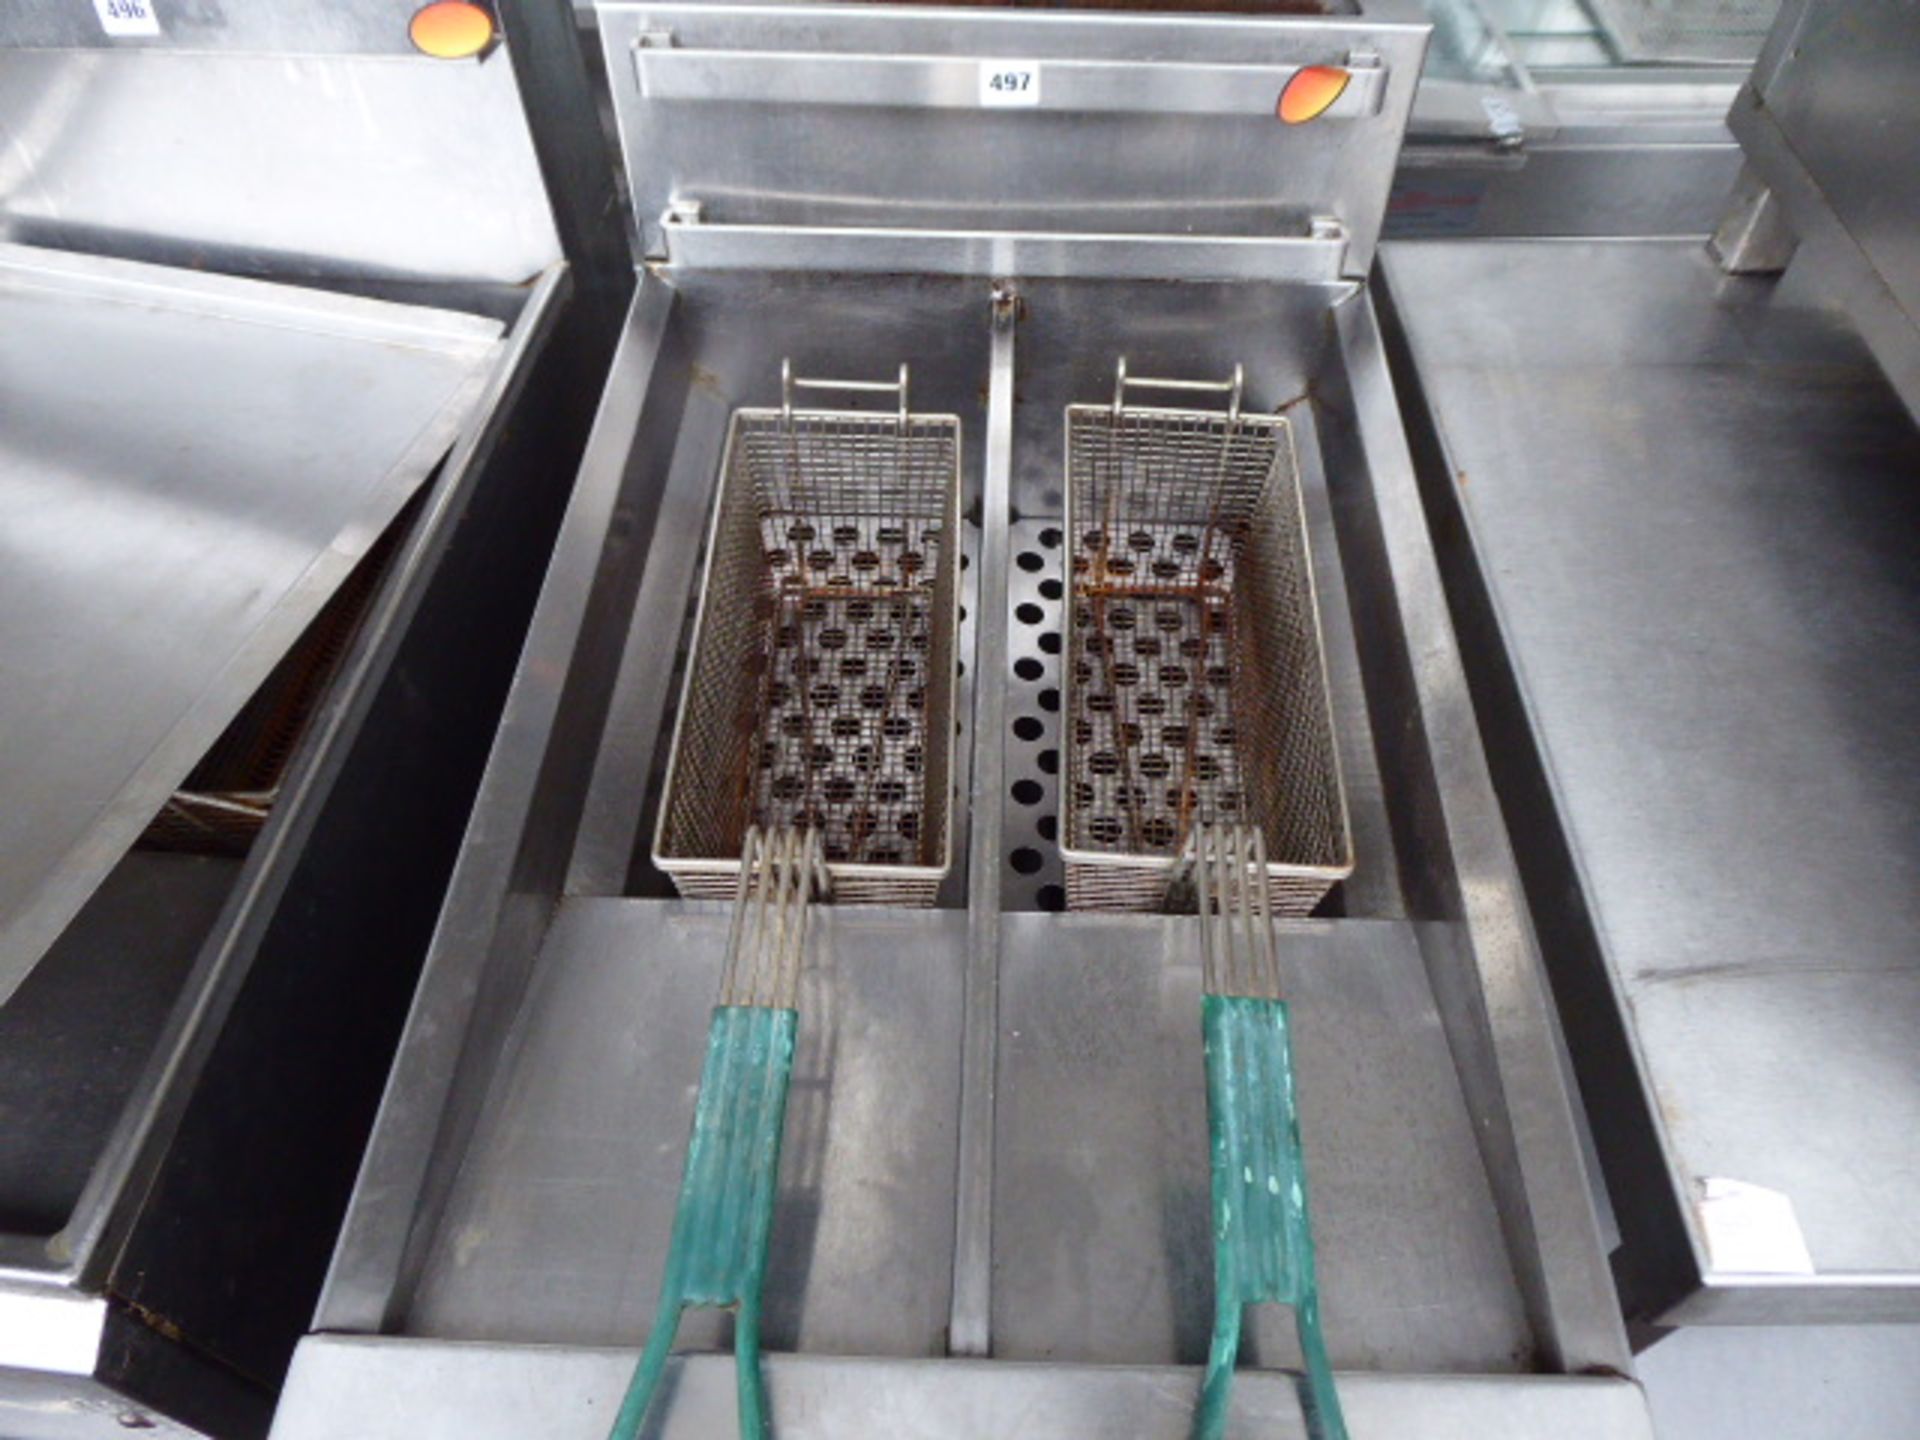 45cm gas Blue Seal Vee Ray twin tank fryer with 2 baskets - Image 2 of 2